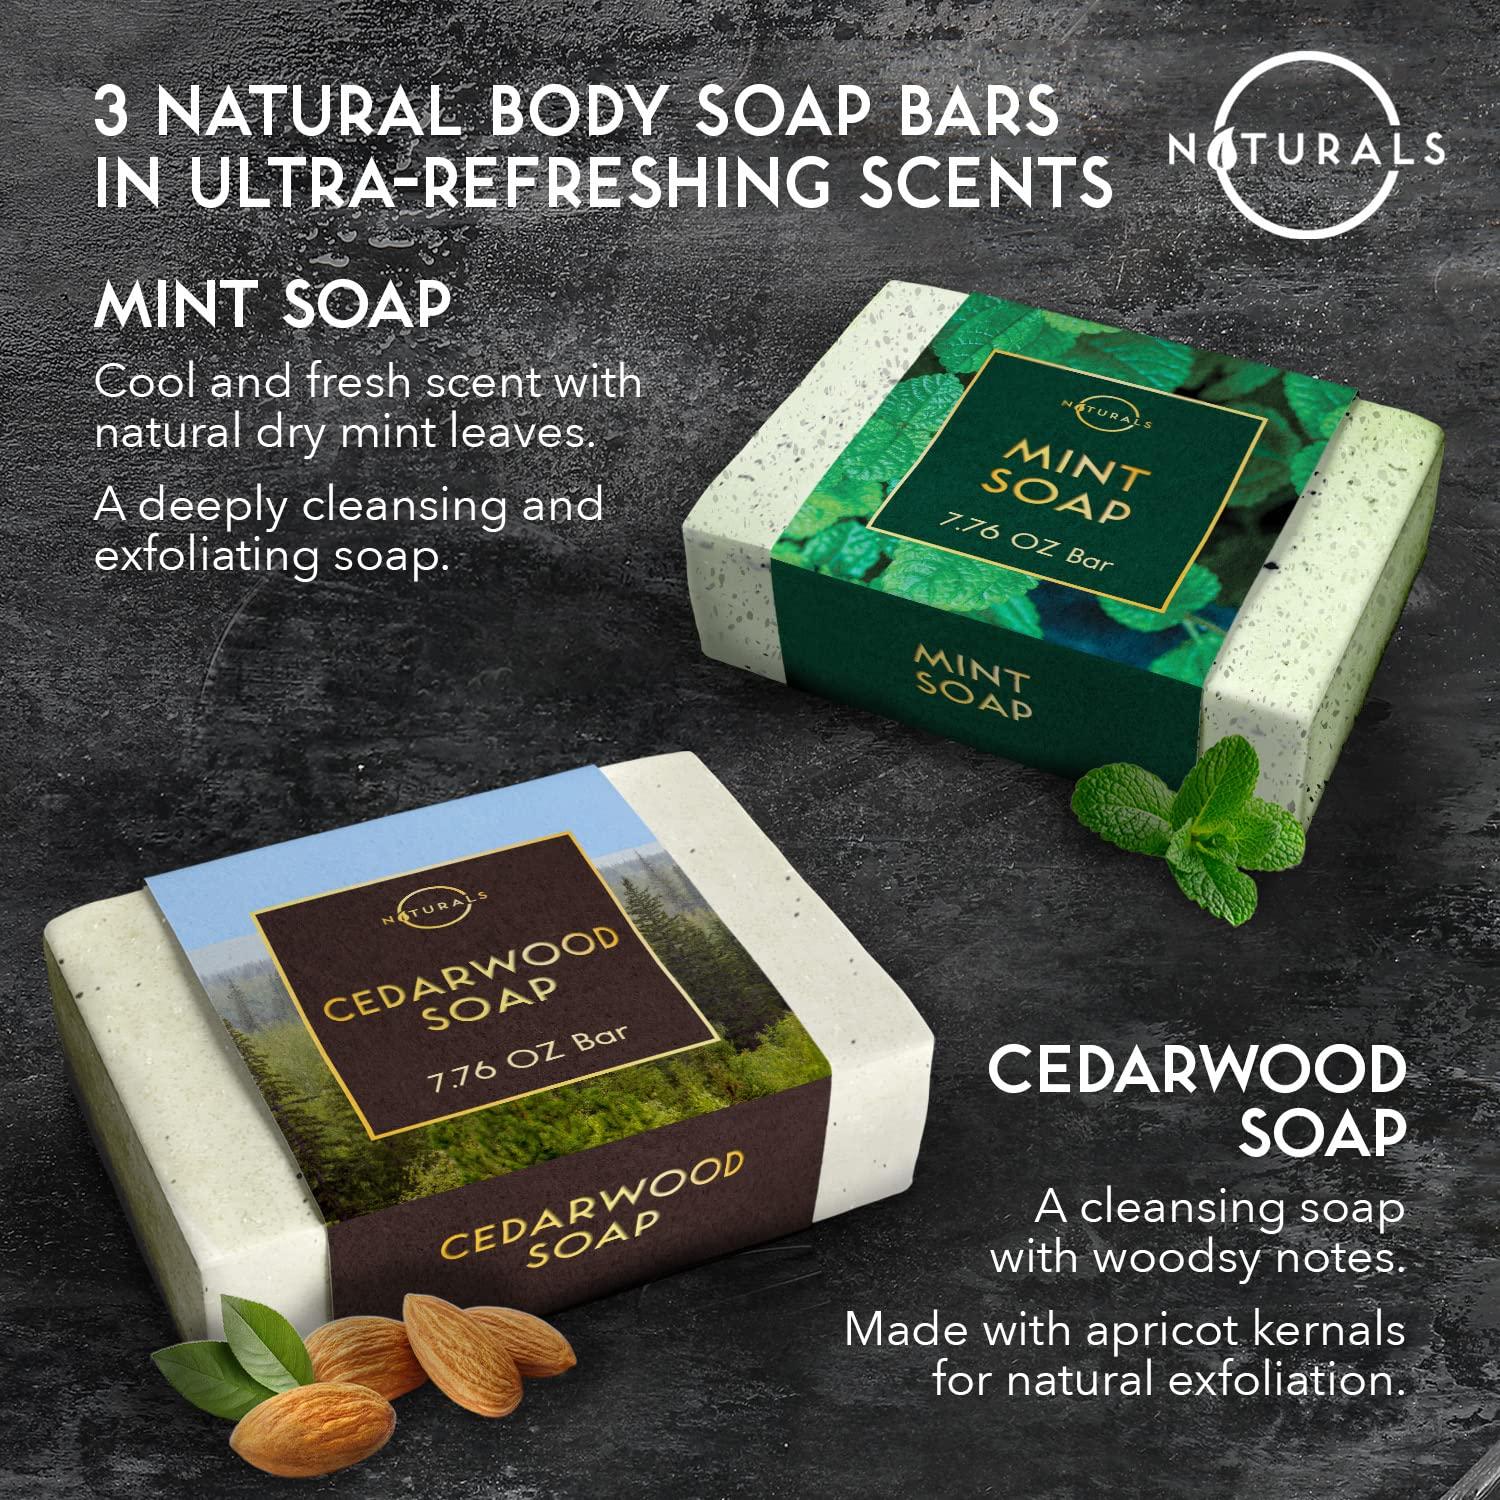 Traverse Bay Bath and Body- All natural handmade cold process bar soap,  Eucalyptus mint with French green clay, essential oil soap. 3 bar pack 16 +  . Made in the USA at